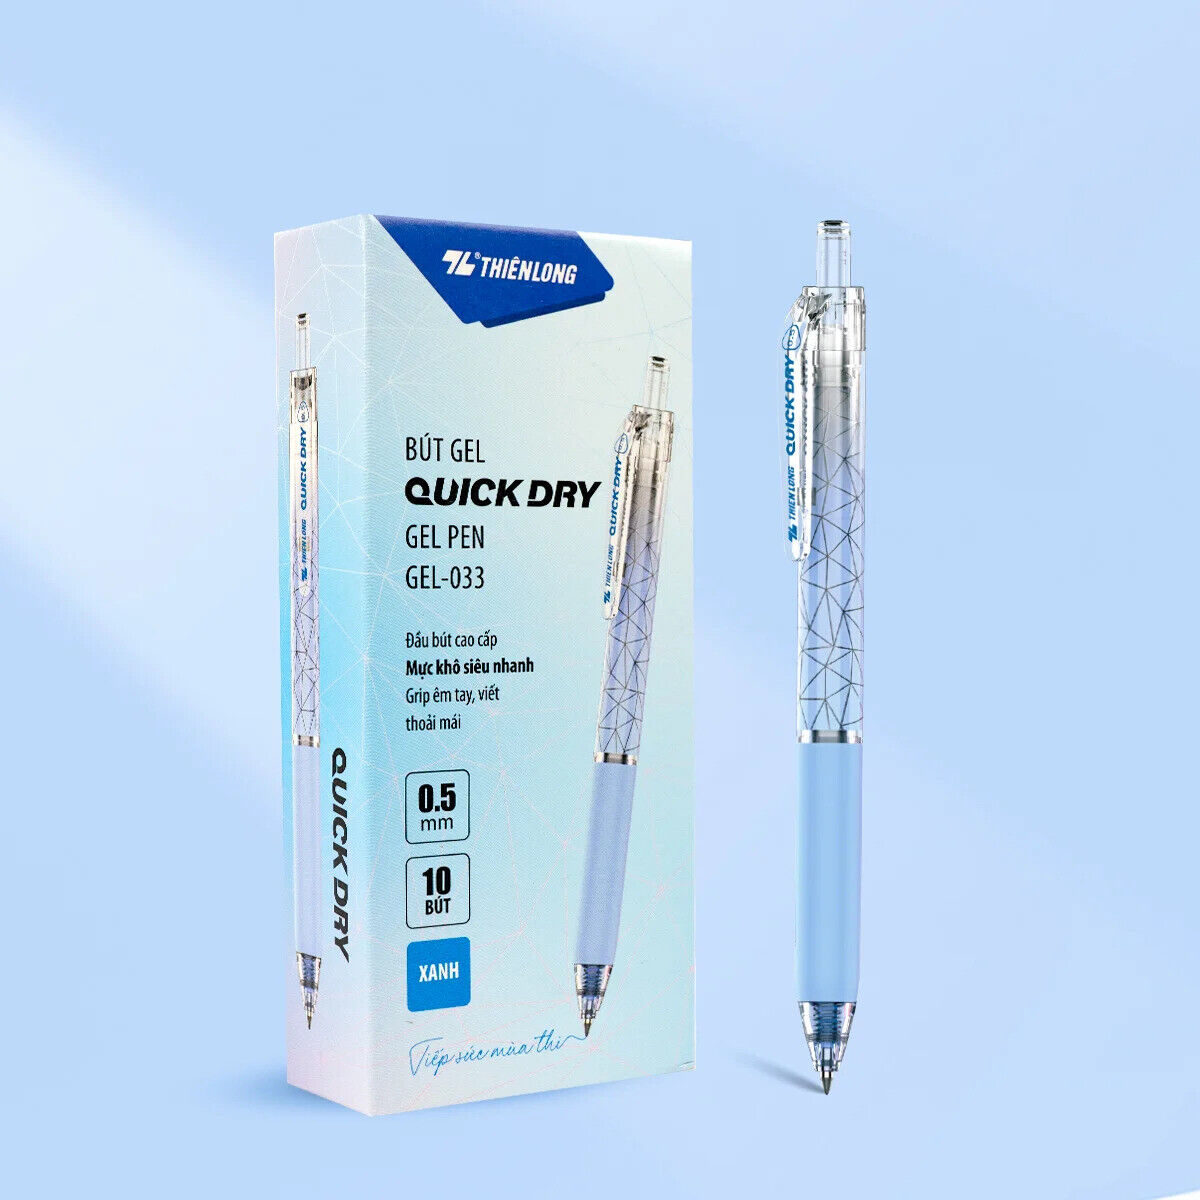 Thien Long Quick Dry Gel Pen 0.5mm 10 Pack Ultra-Fine Tip Smooth Writing